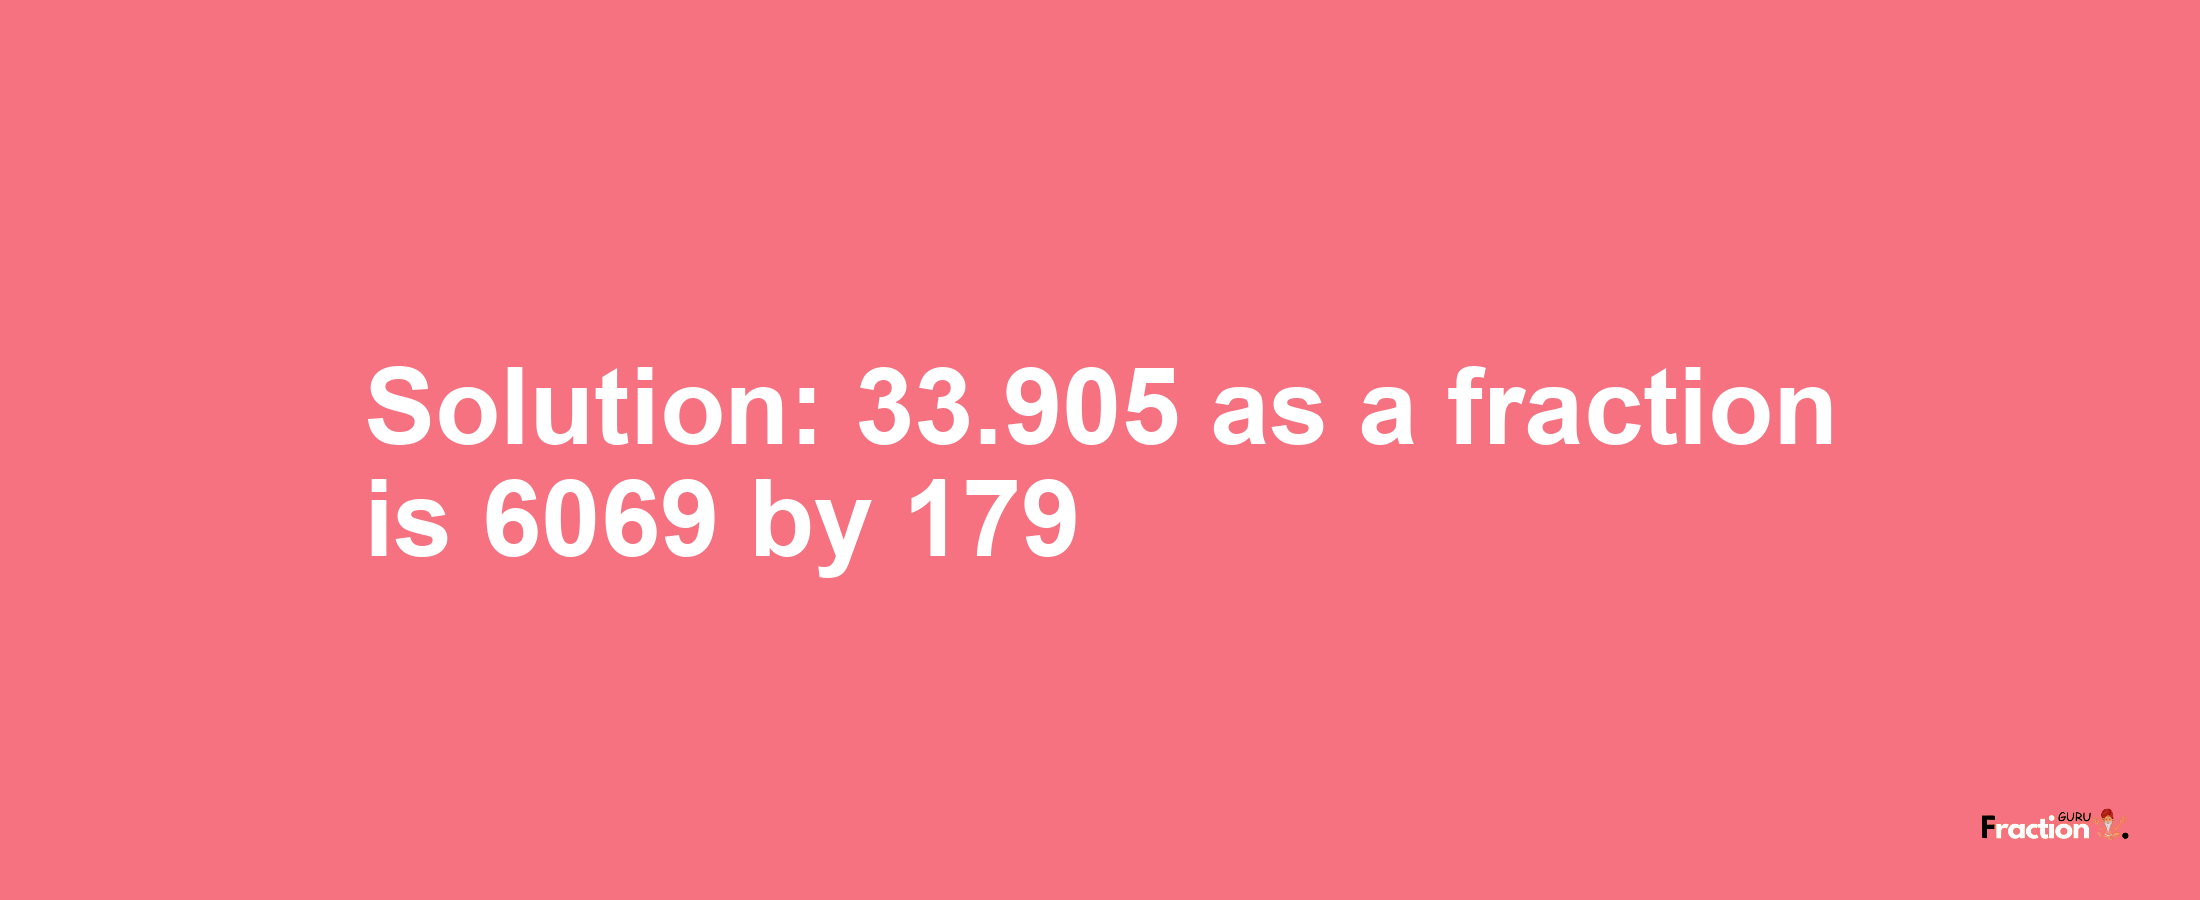 Solution:33.905 as a fraction is 6069/179